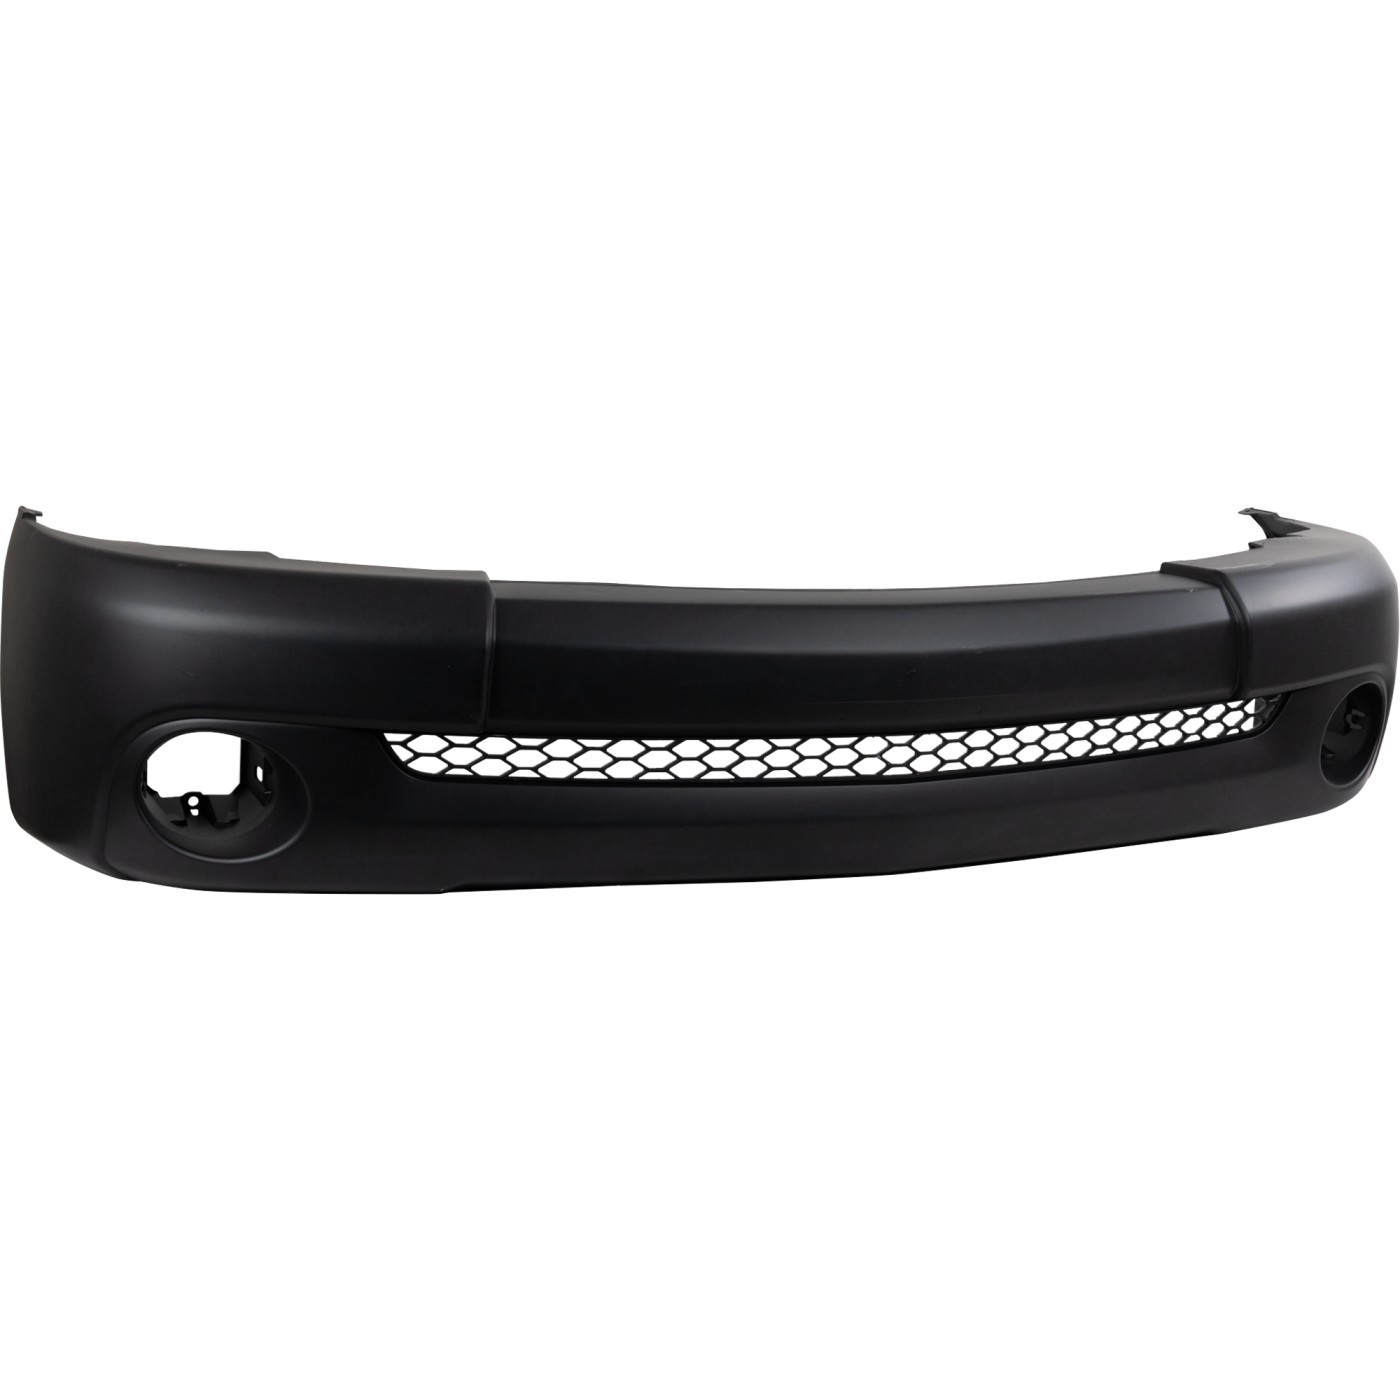 NEW Primered - Front Bumper Cover For 2000-2006 Toyota Tundra Pickup